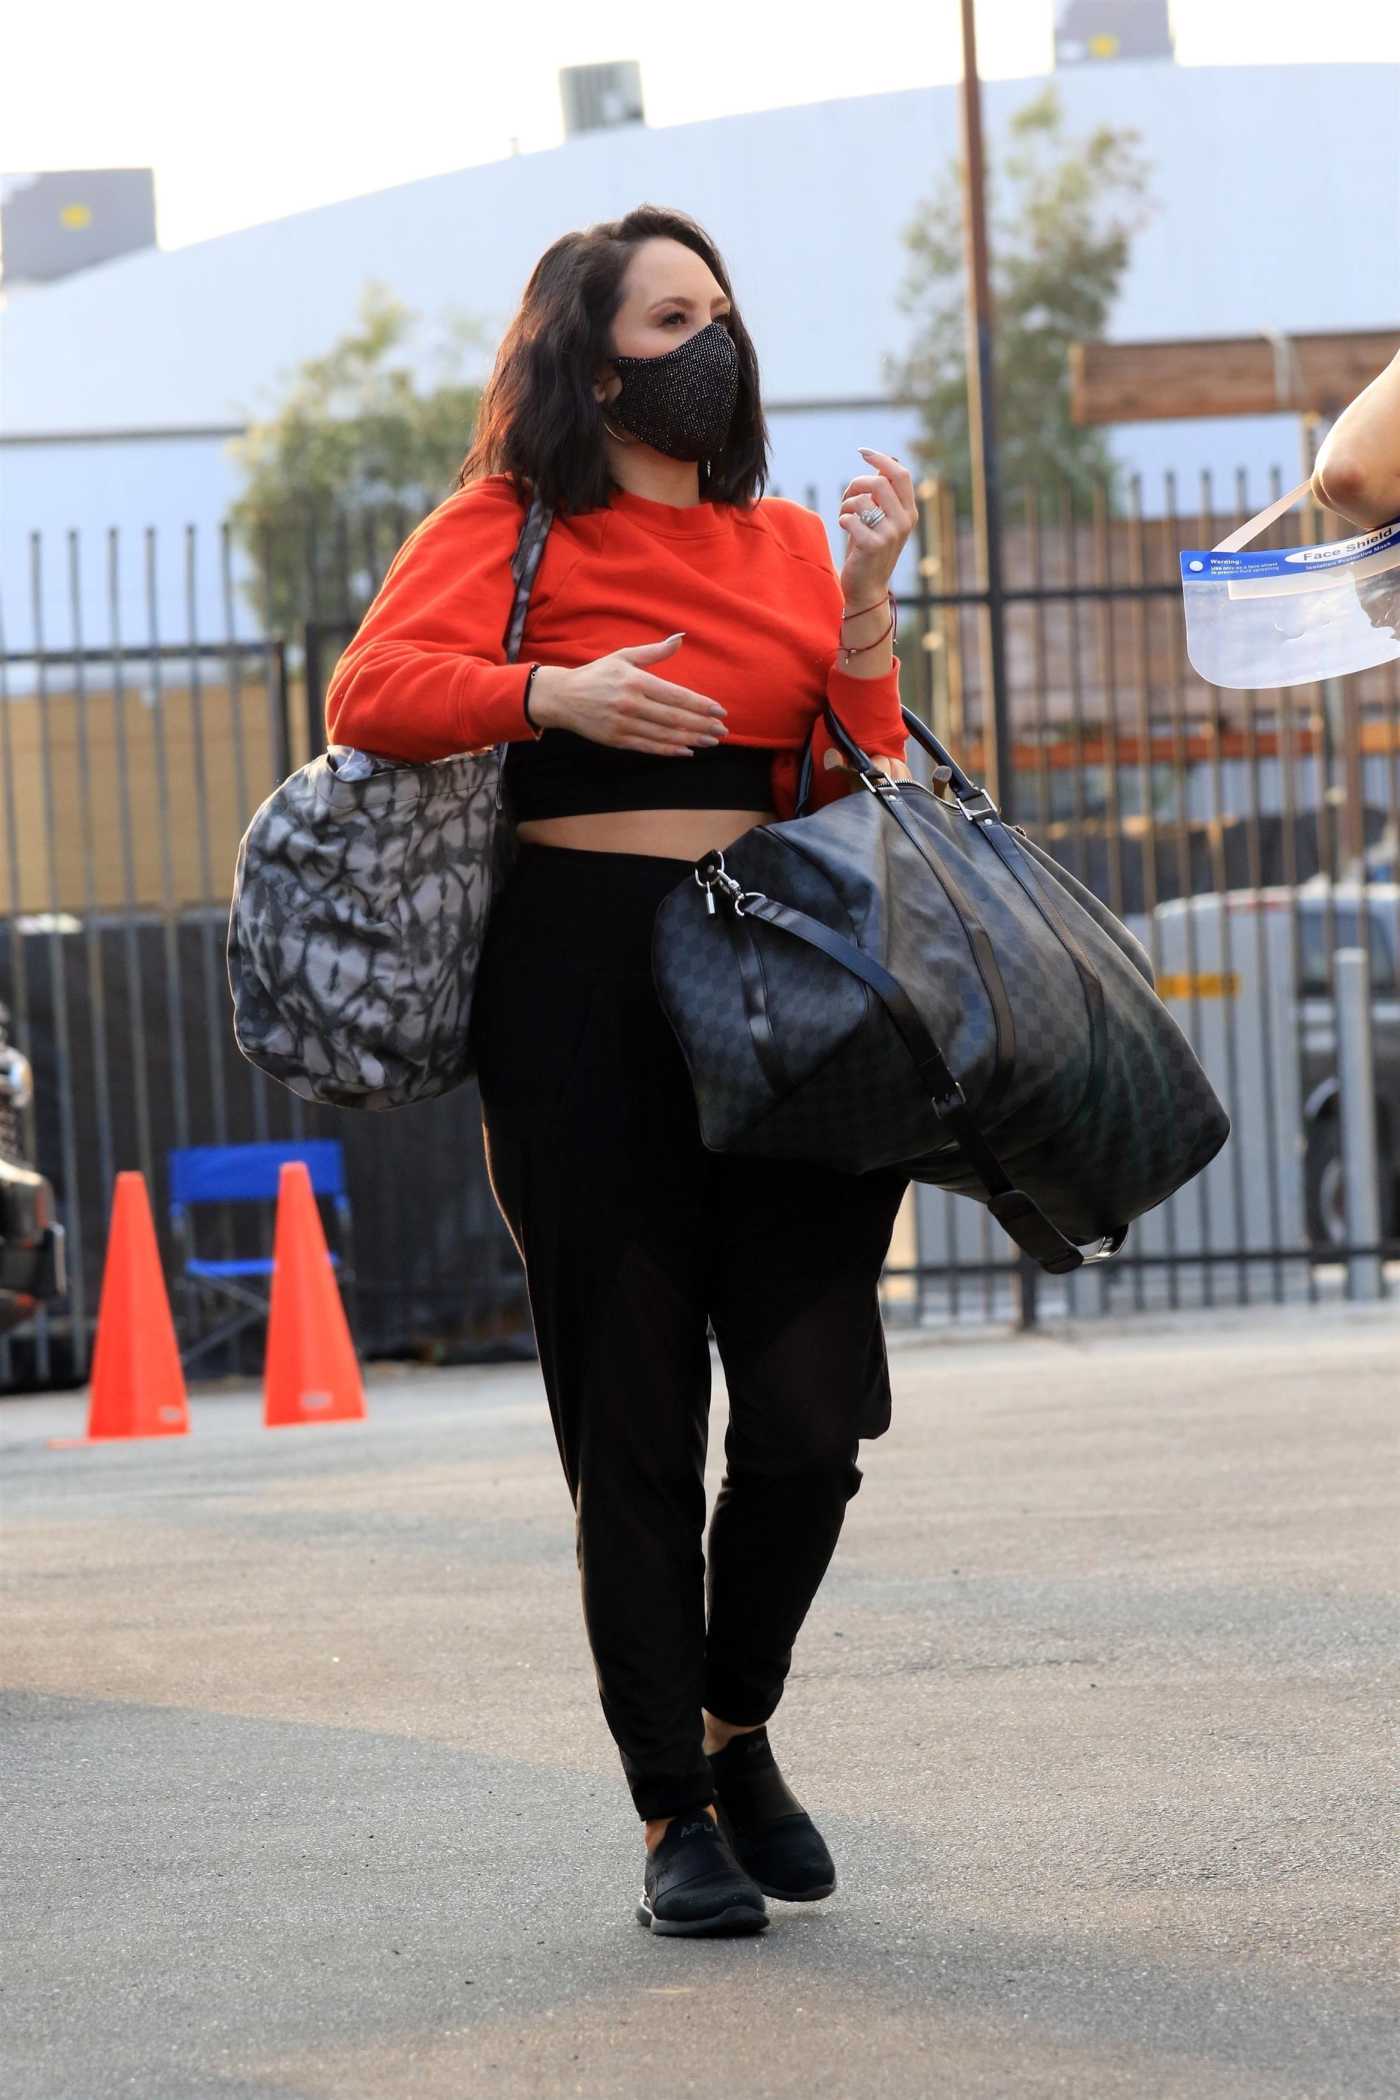 Cheryl Burke in a Red Cropped Sweatshirt Heads to the DWTS Studio in Los Angeles 10/08/2020